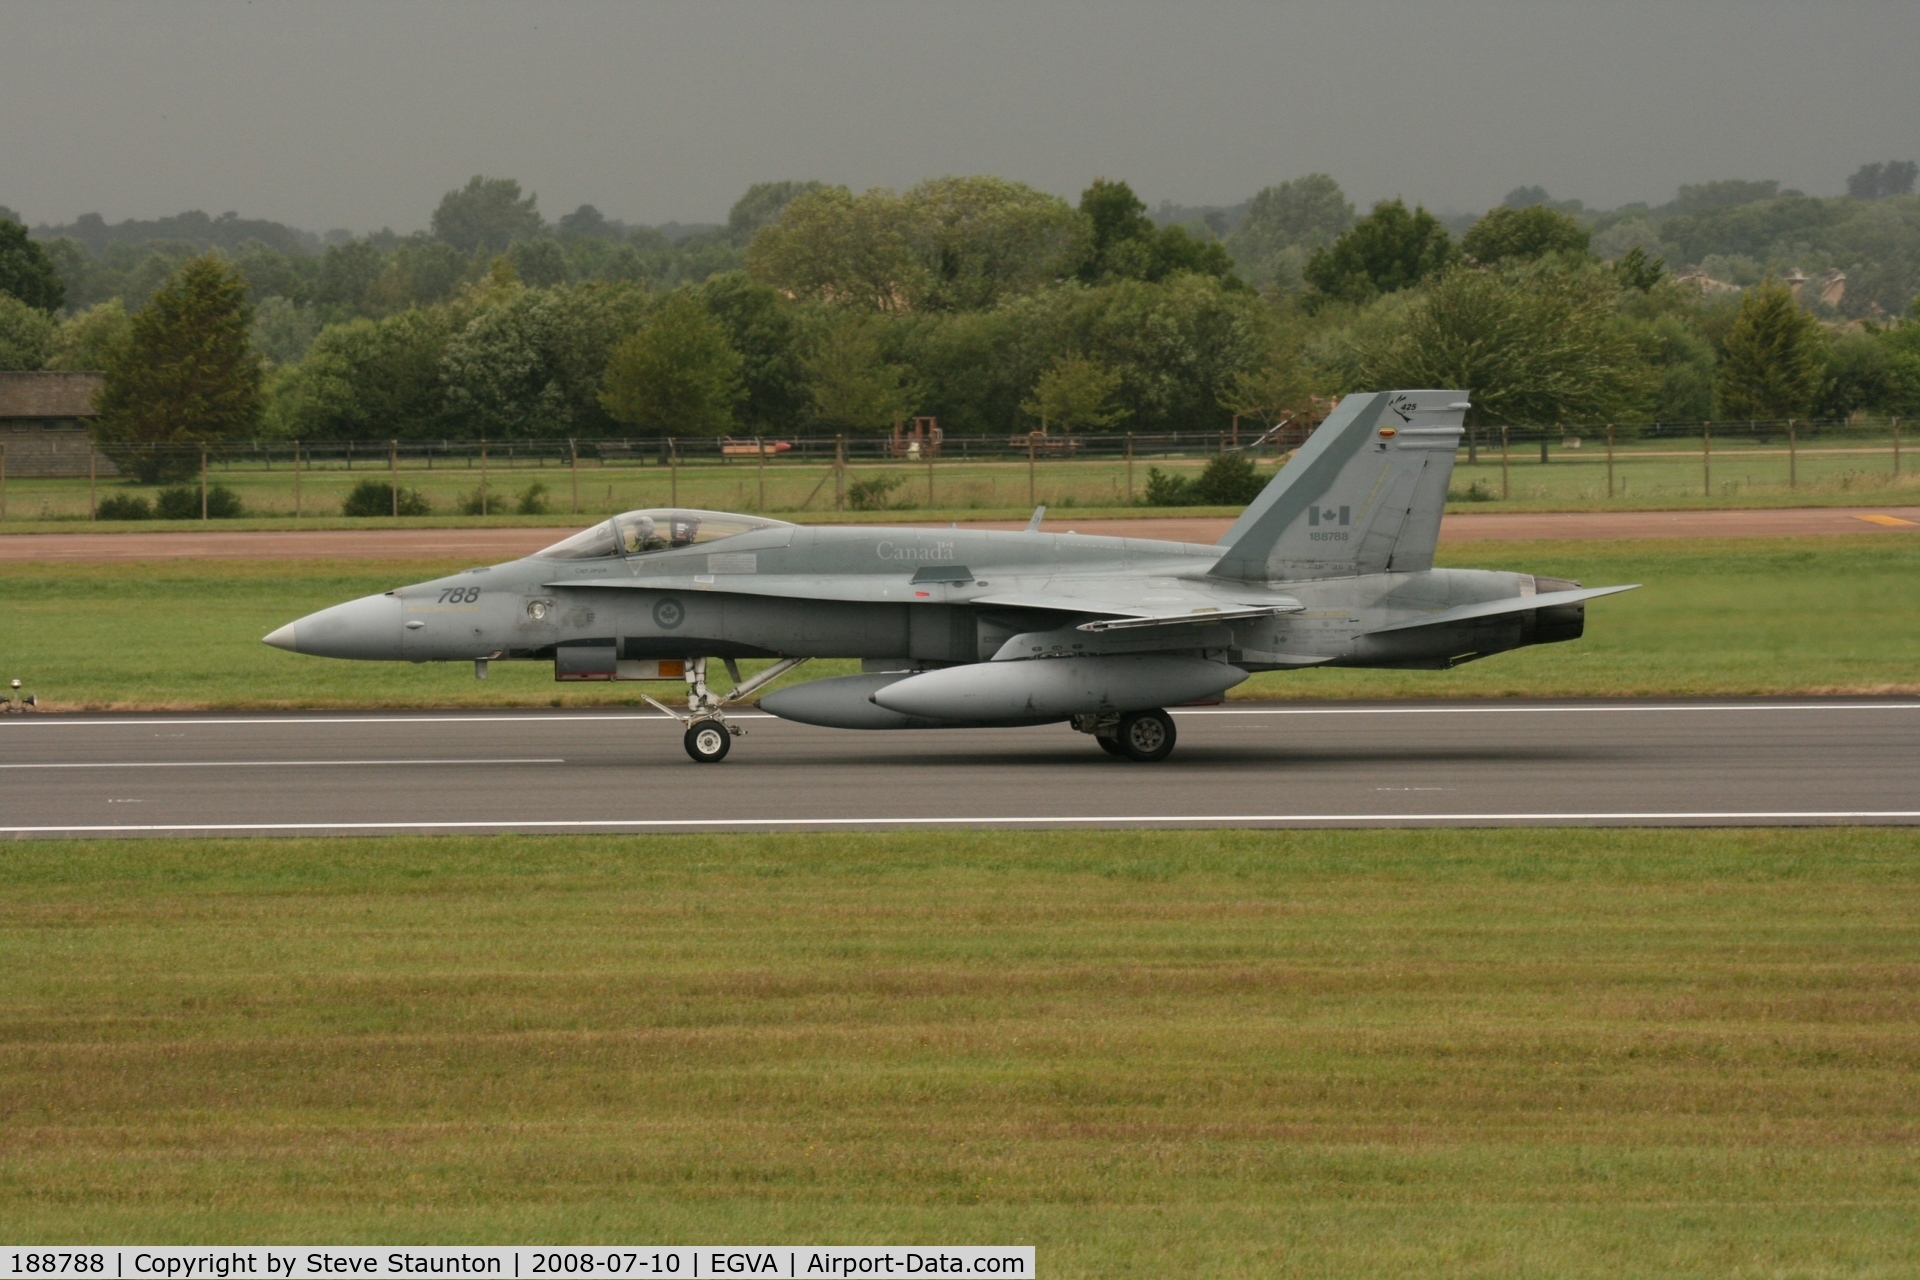 188788, 1987 McDonnell Douglas CF-188A Hornet C/N 0599/A506, Taken at the Royal International Air Tattoo 2008 during arrivals and departures (show days cancelled due to bad weather)